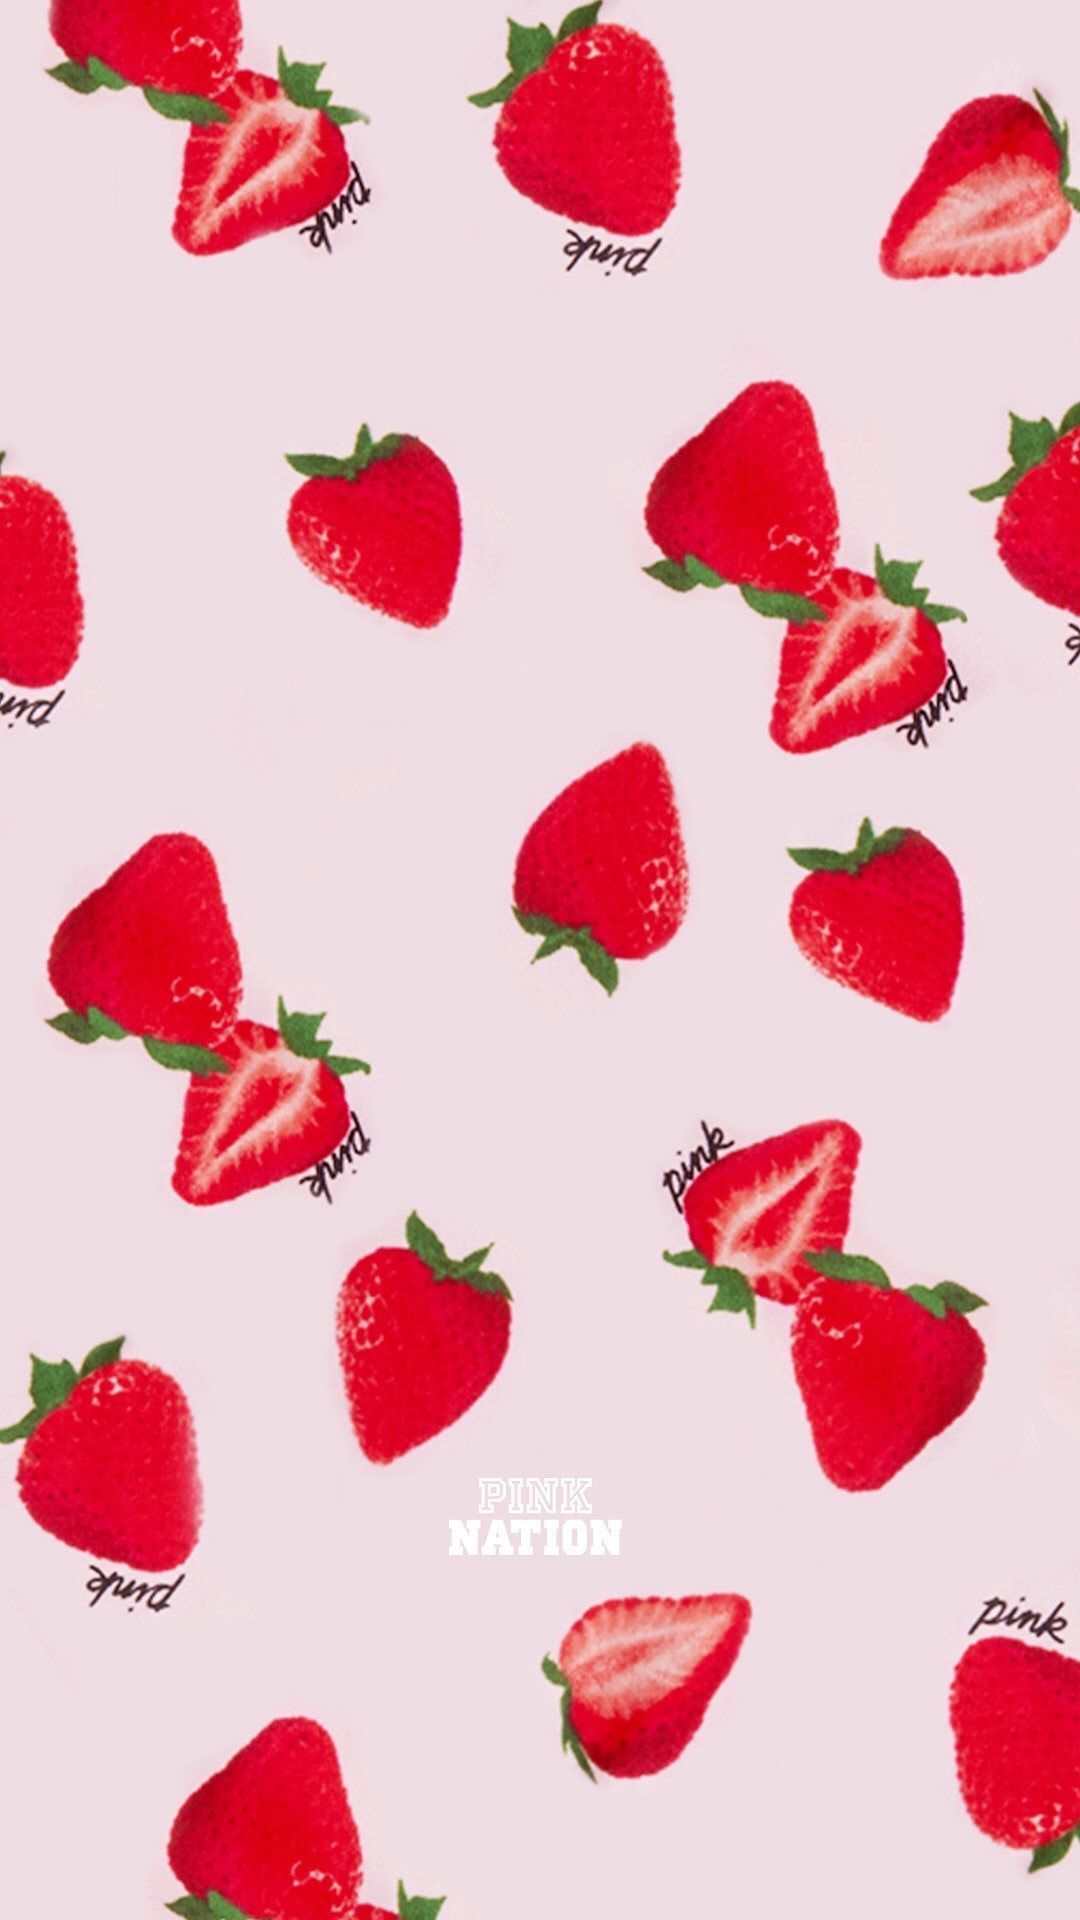 Cute Aesthetic Strawberry Wallpapers - Wallpaper Cave